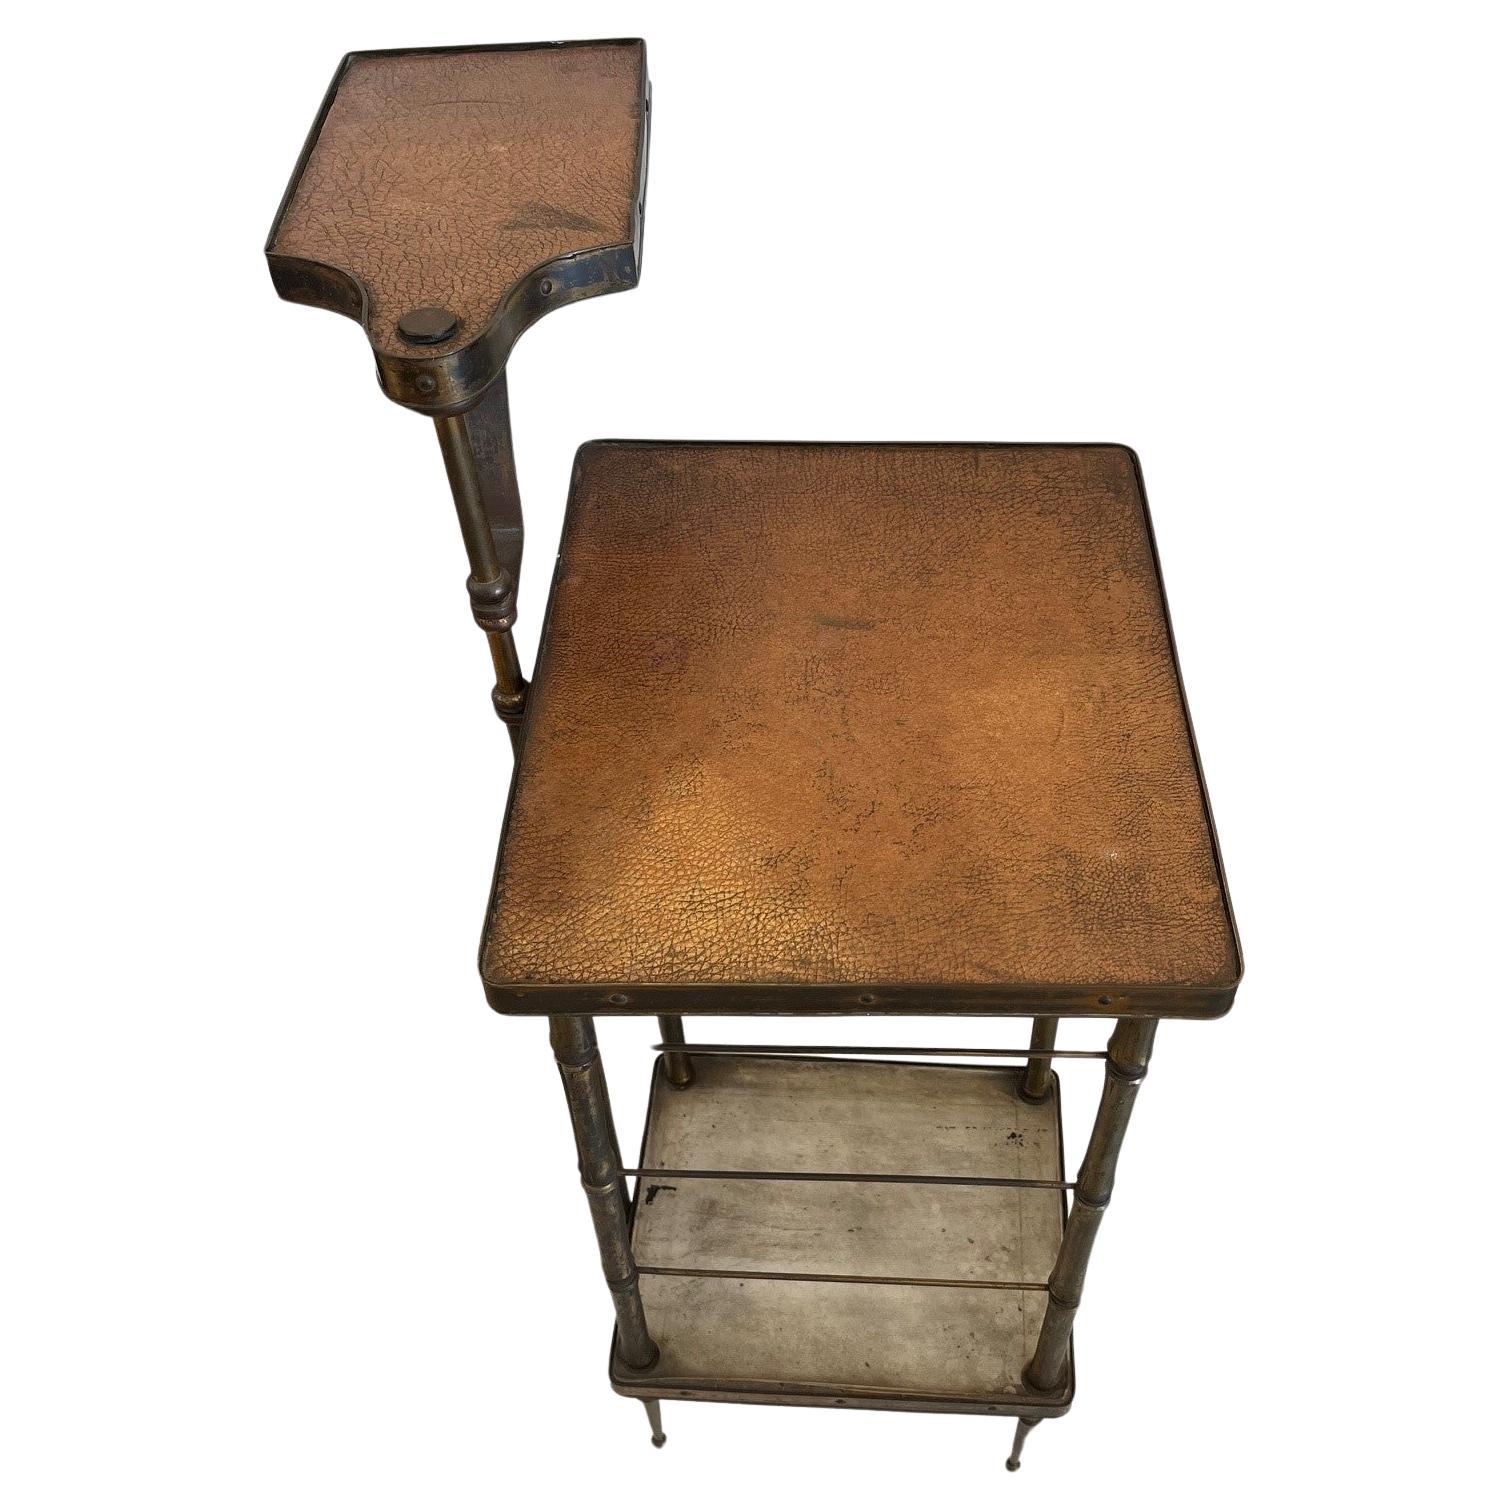 Vintage Leather Top Table with Swing Arm Tray For Sale